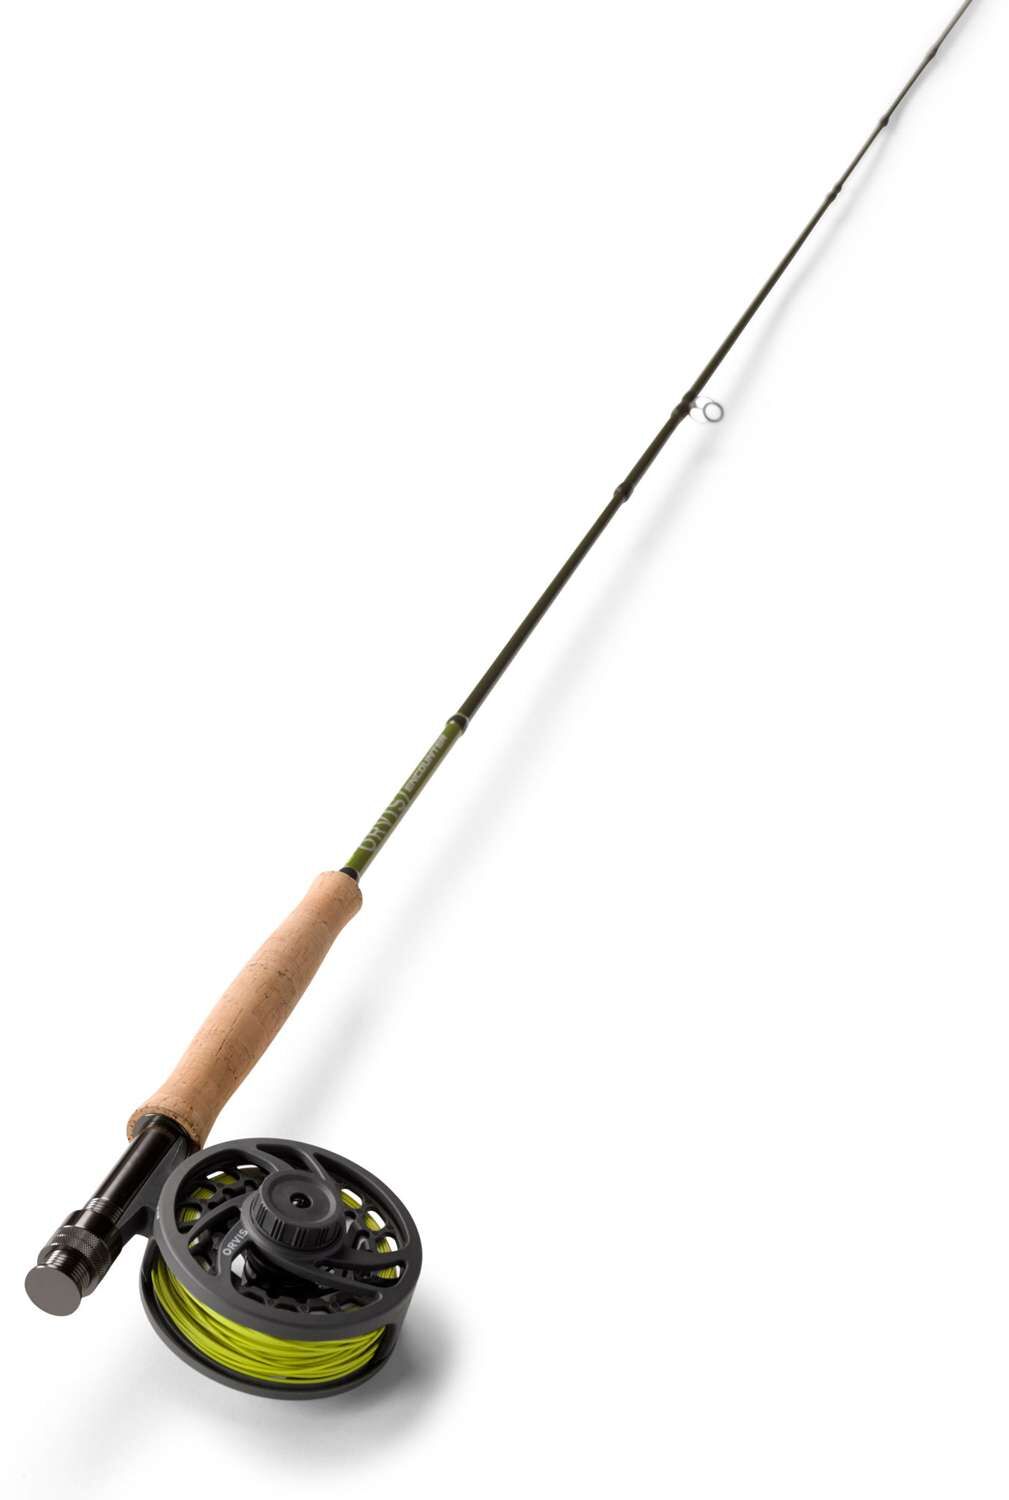 Orvis Encounter Fly Rod Outfit - 5WT. - 9ft.